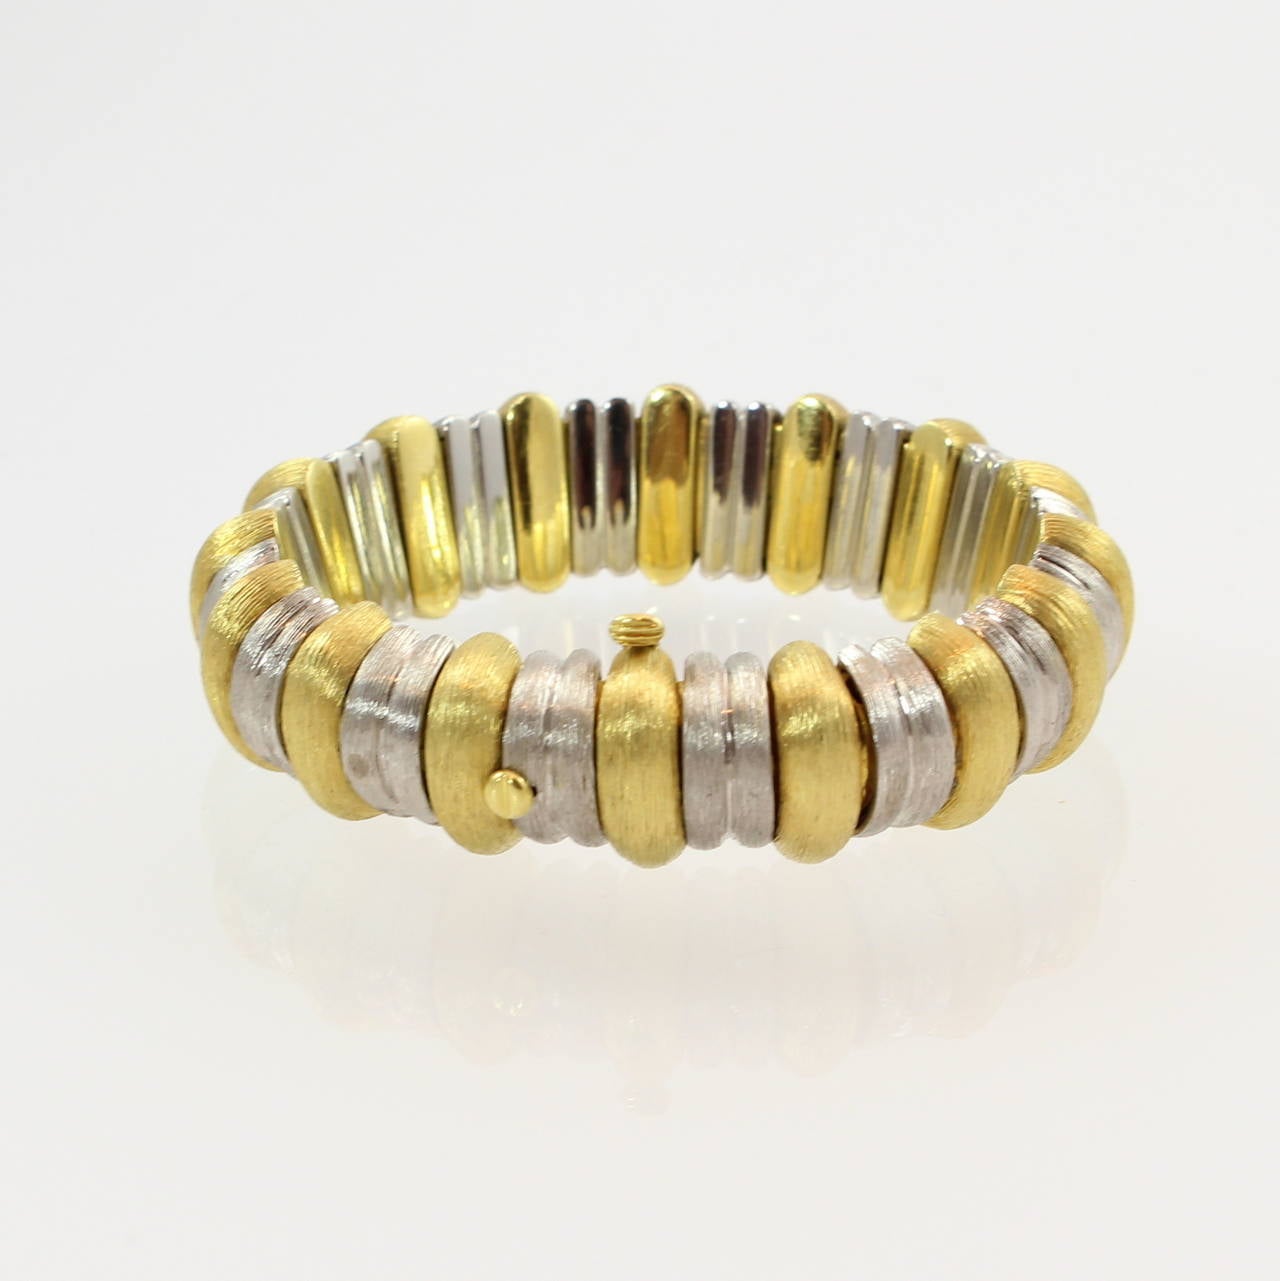 Henry Dunay Platinum and 18K yellow gold  Sabi finish flexible bracelet.
Bracelet is 7 inches long and .63 inches wide.